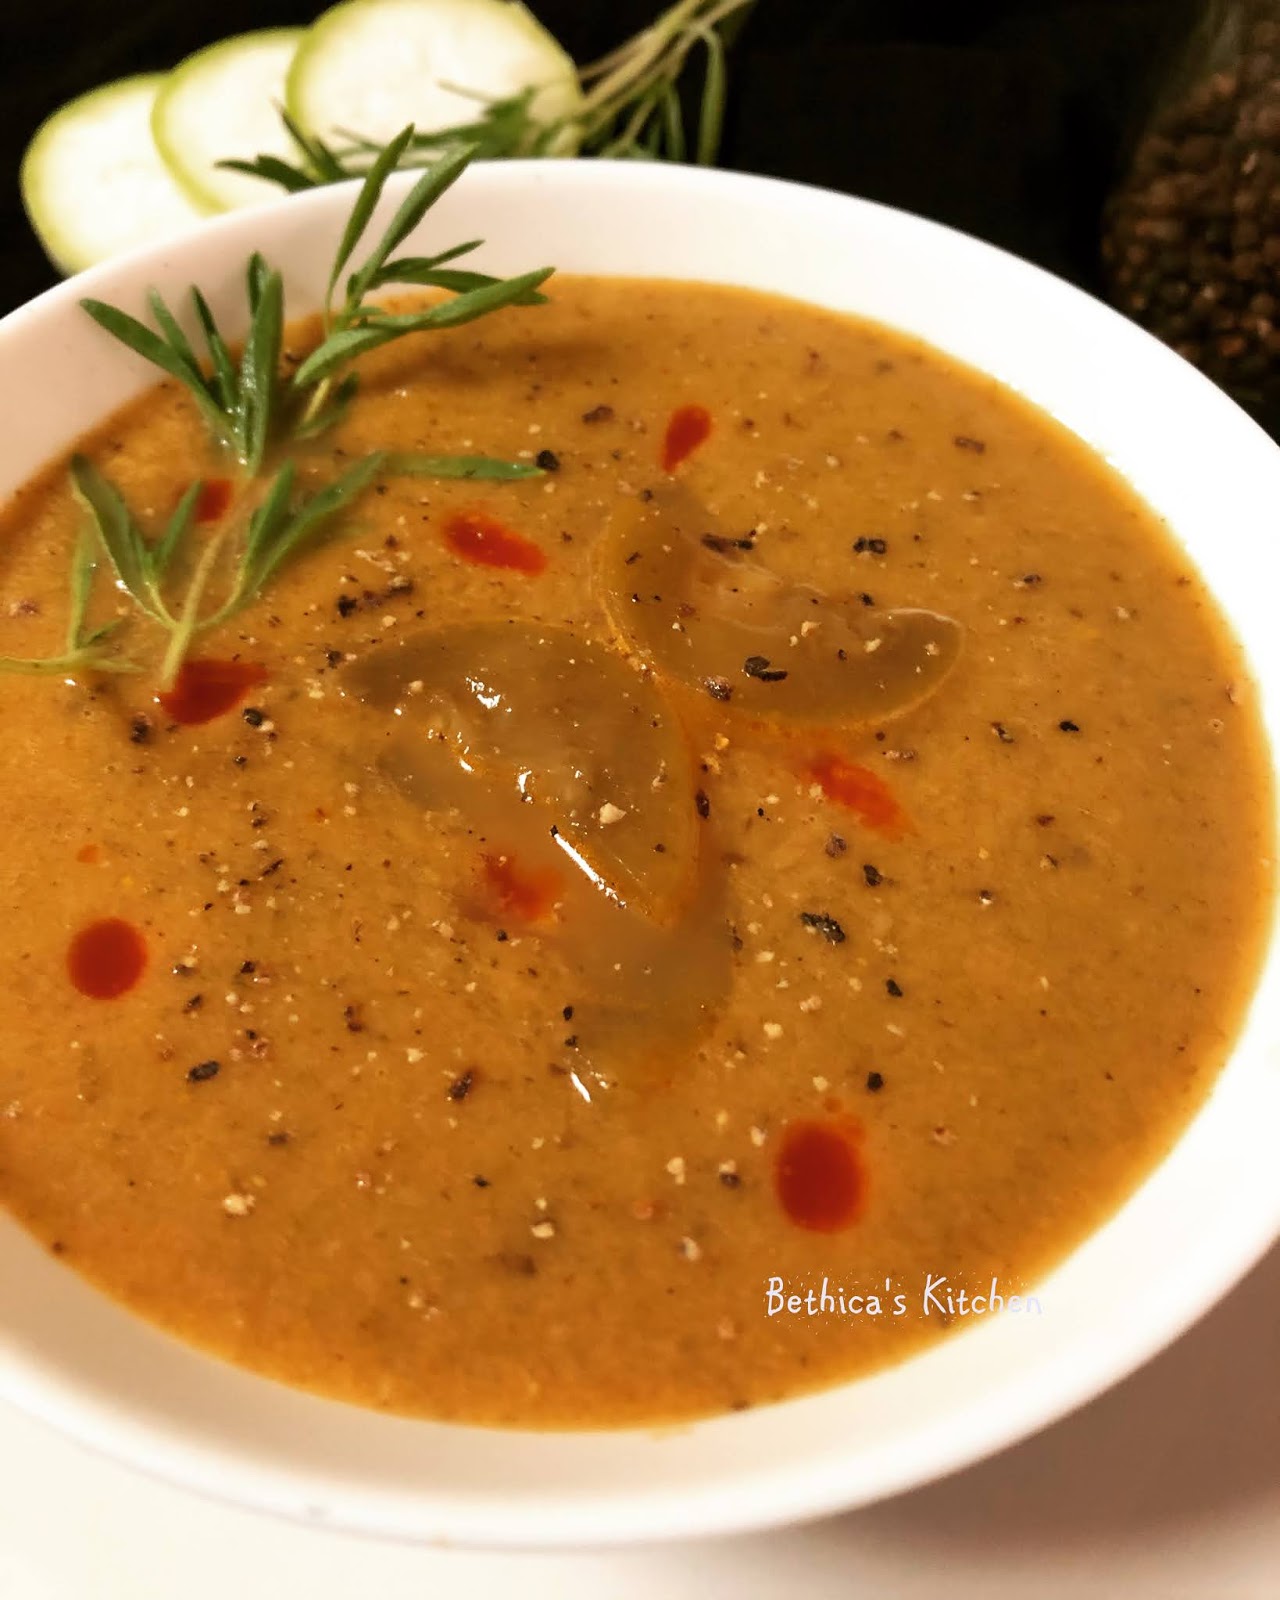 Bethica's Kitchen Flavours: Bottle Gourd Soup with Rosemary Flavour